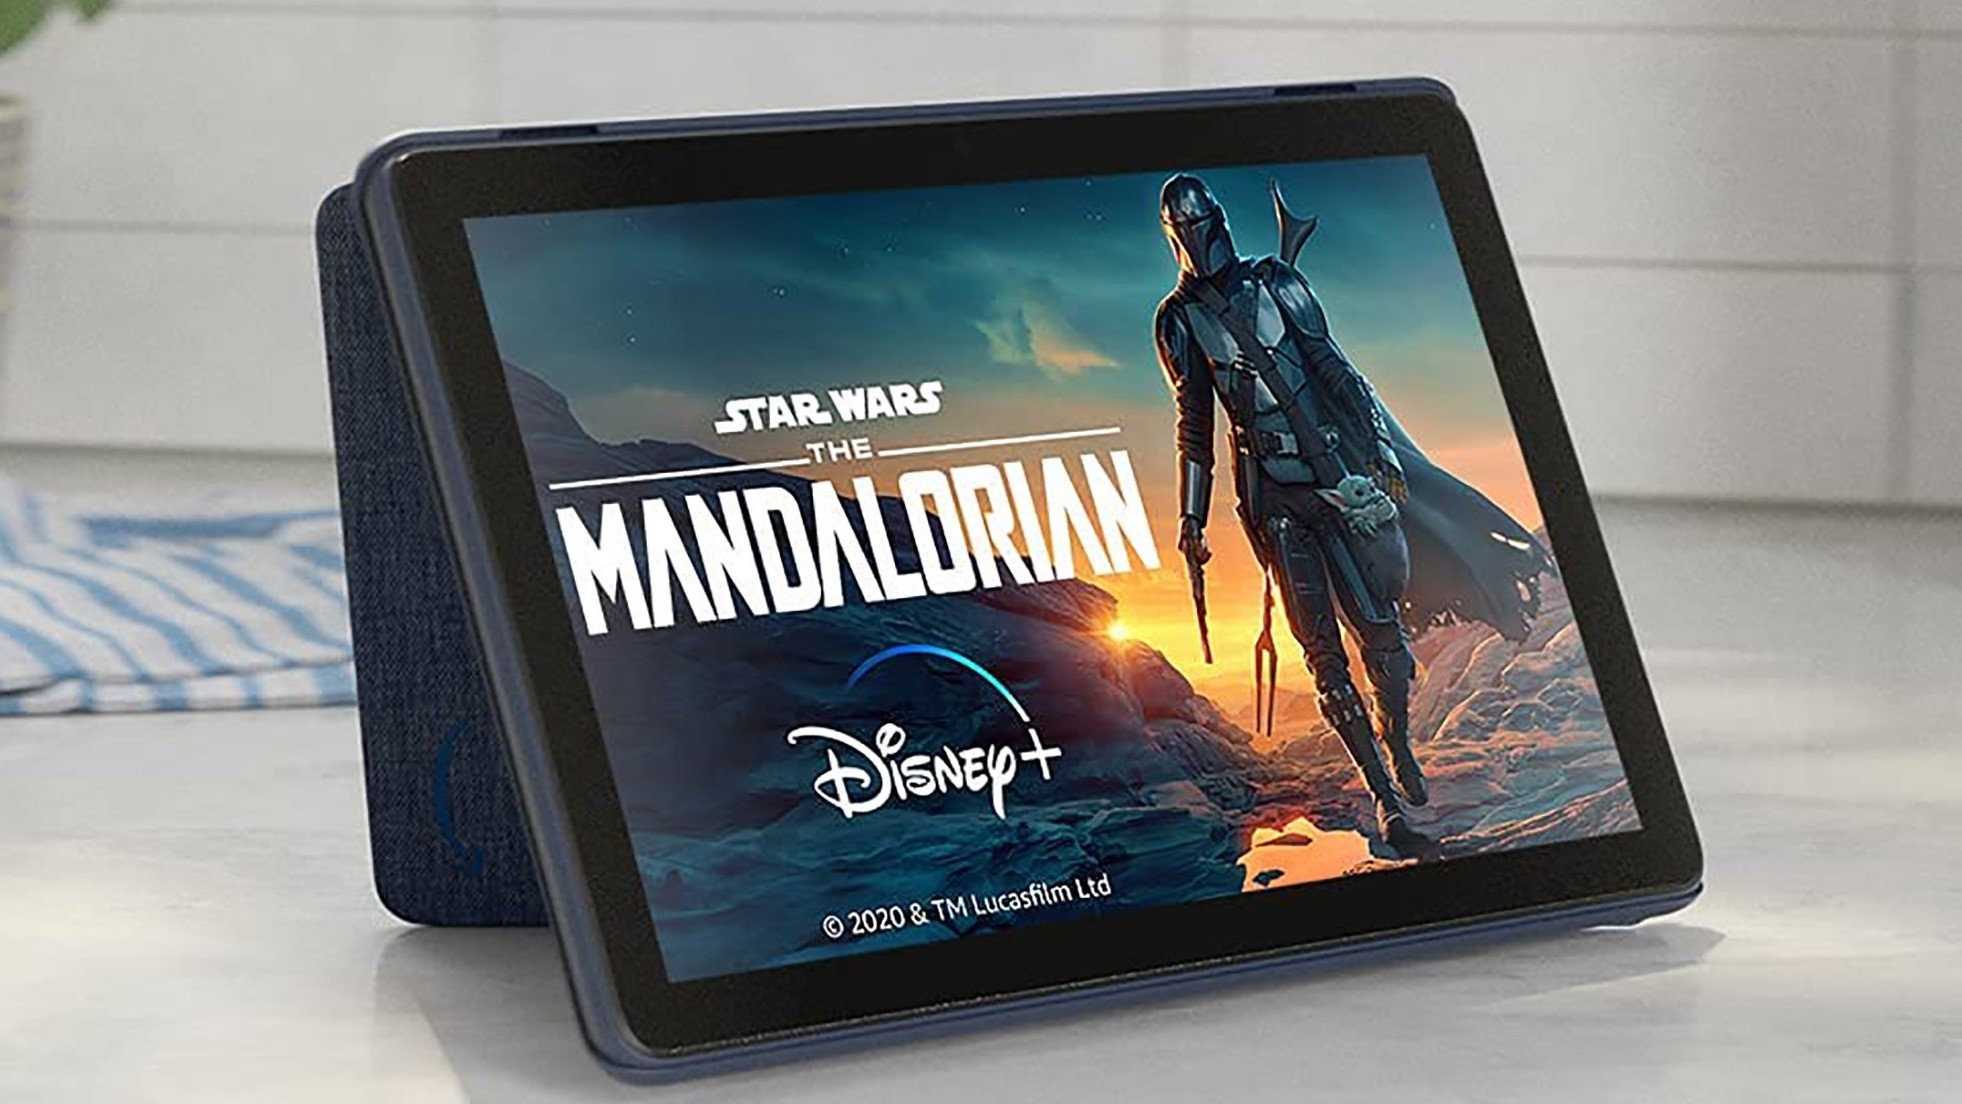 An Amazon Fire HD 10 tablet sits on a kitchen counter.  The Mandalorian appears on screen.